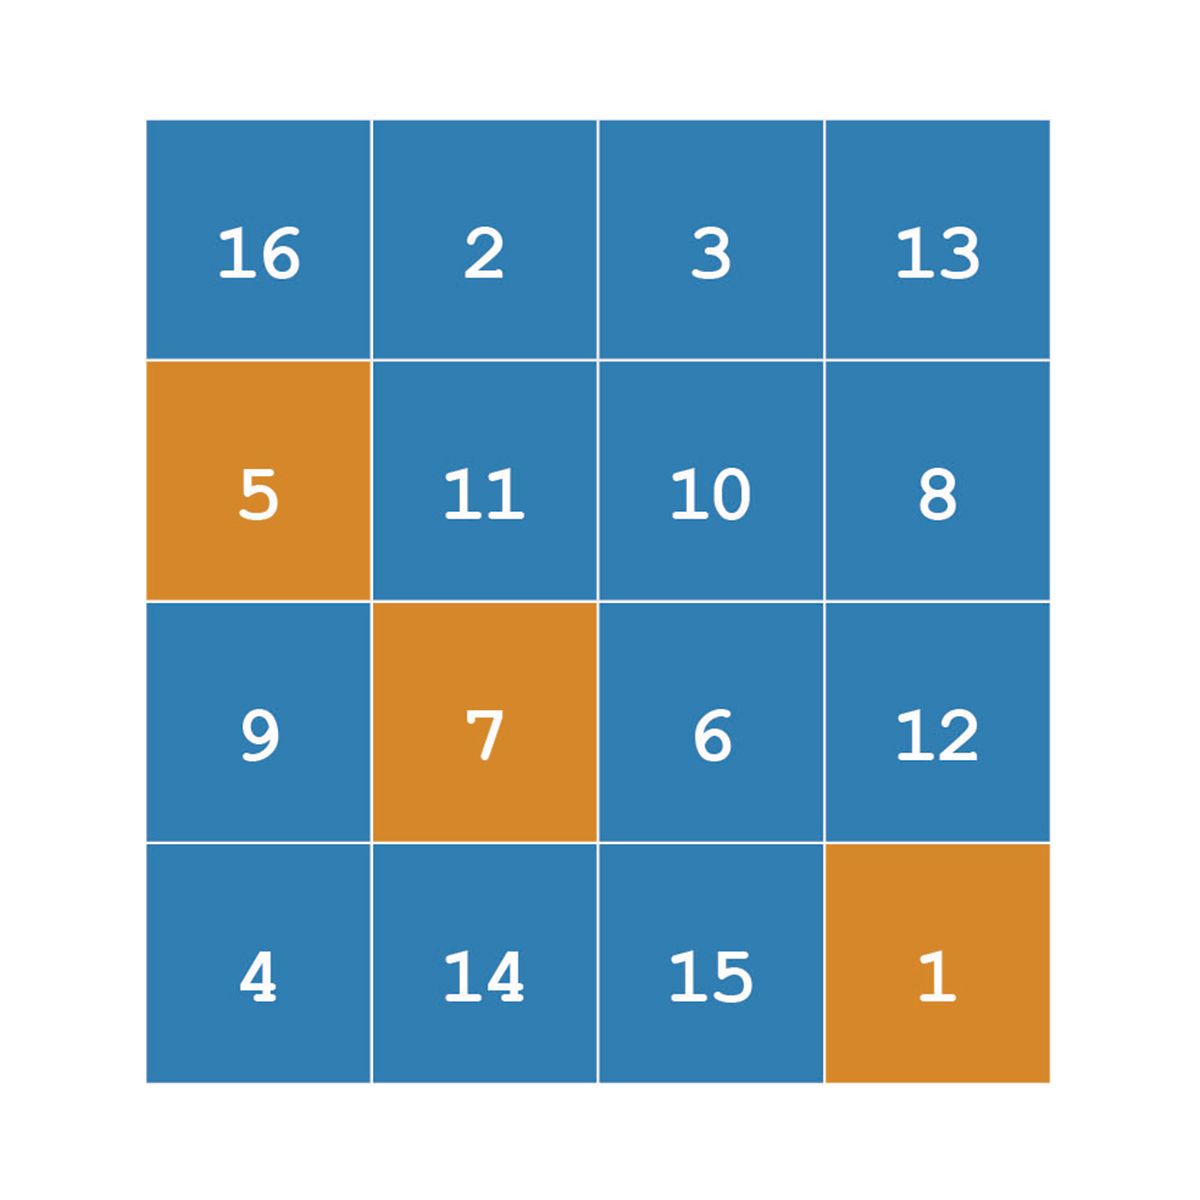 4x4 matrix with three highlighted values scattered in the matrix at disparate locations. They are in row 2, column 1; row 3, column 2; and row 4, column 4, respectively.